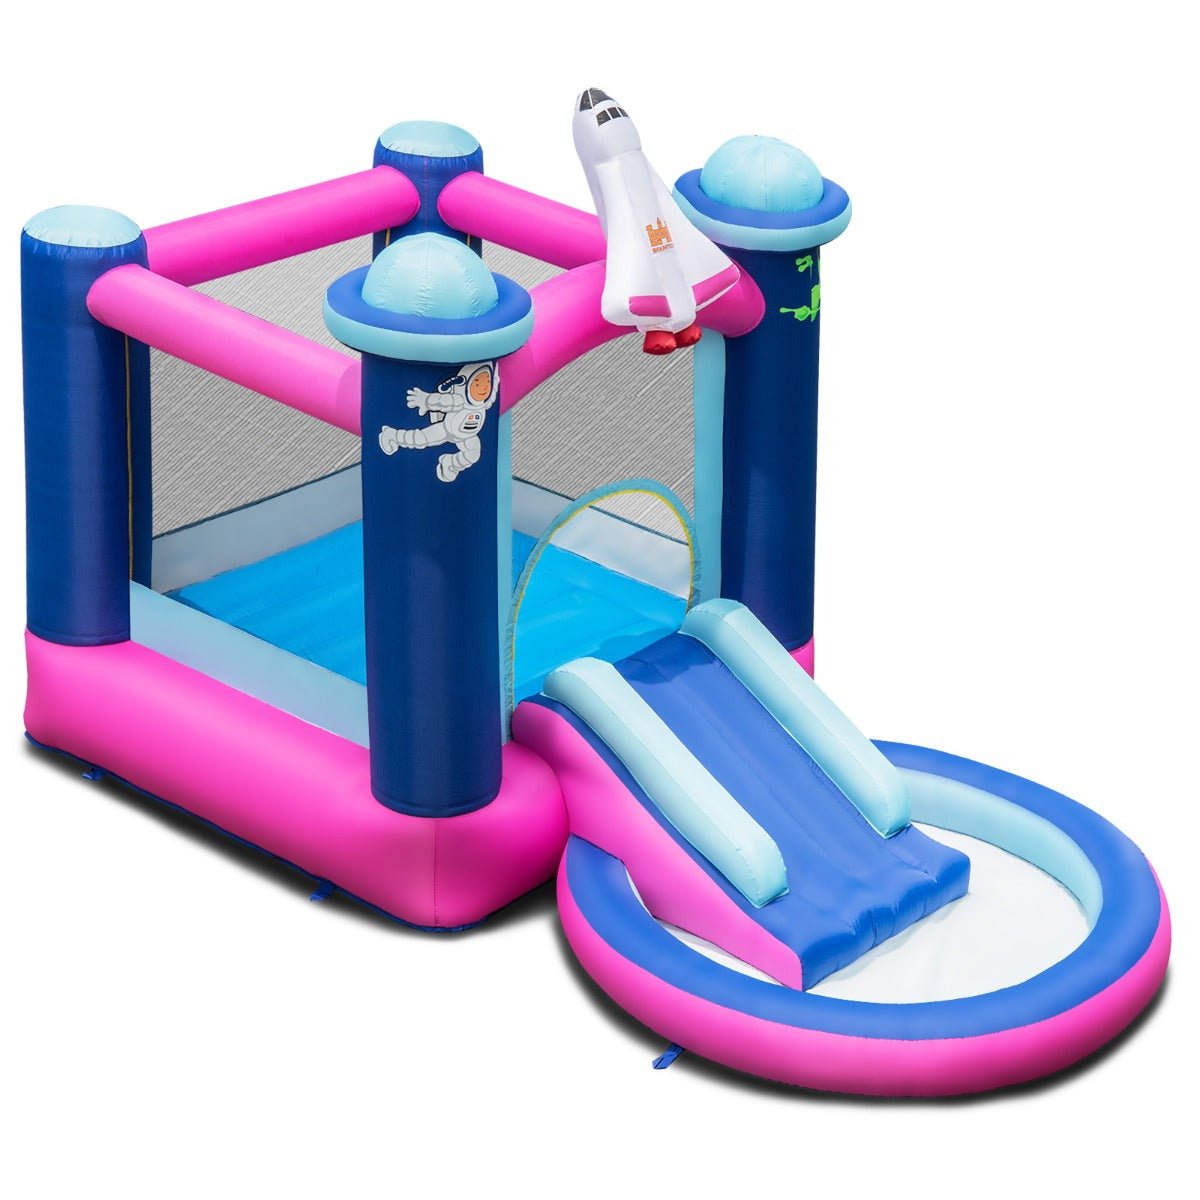 Space-Themed Bounce House with Jumping Area & Slide - Galactic Adventure